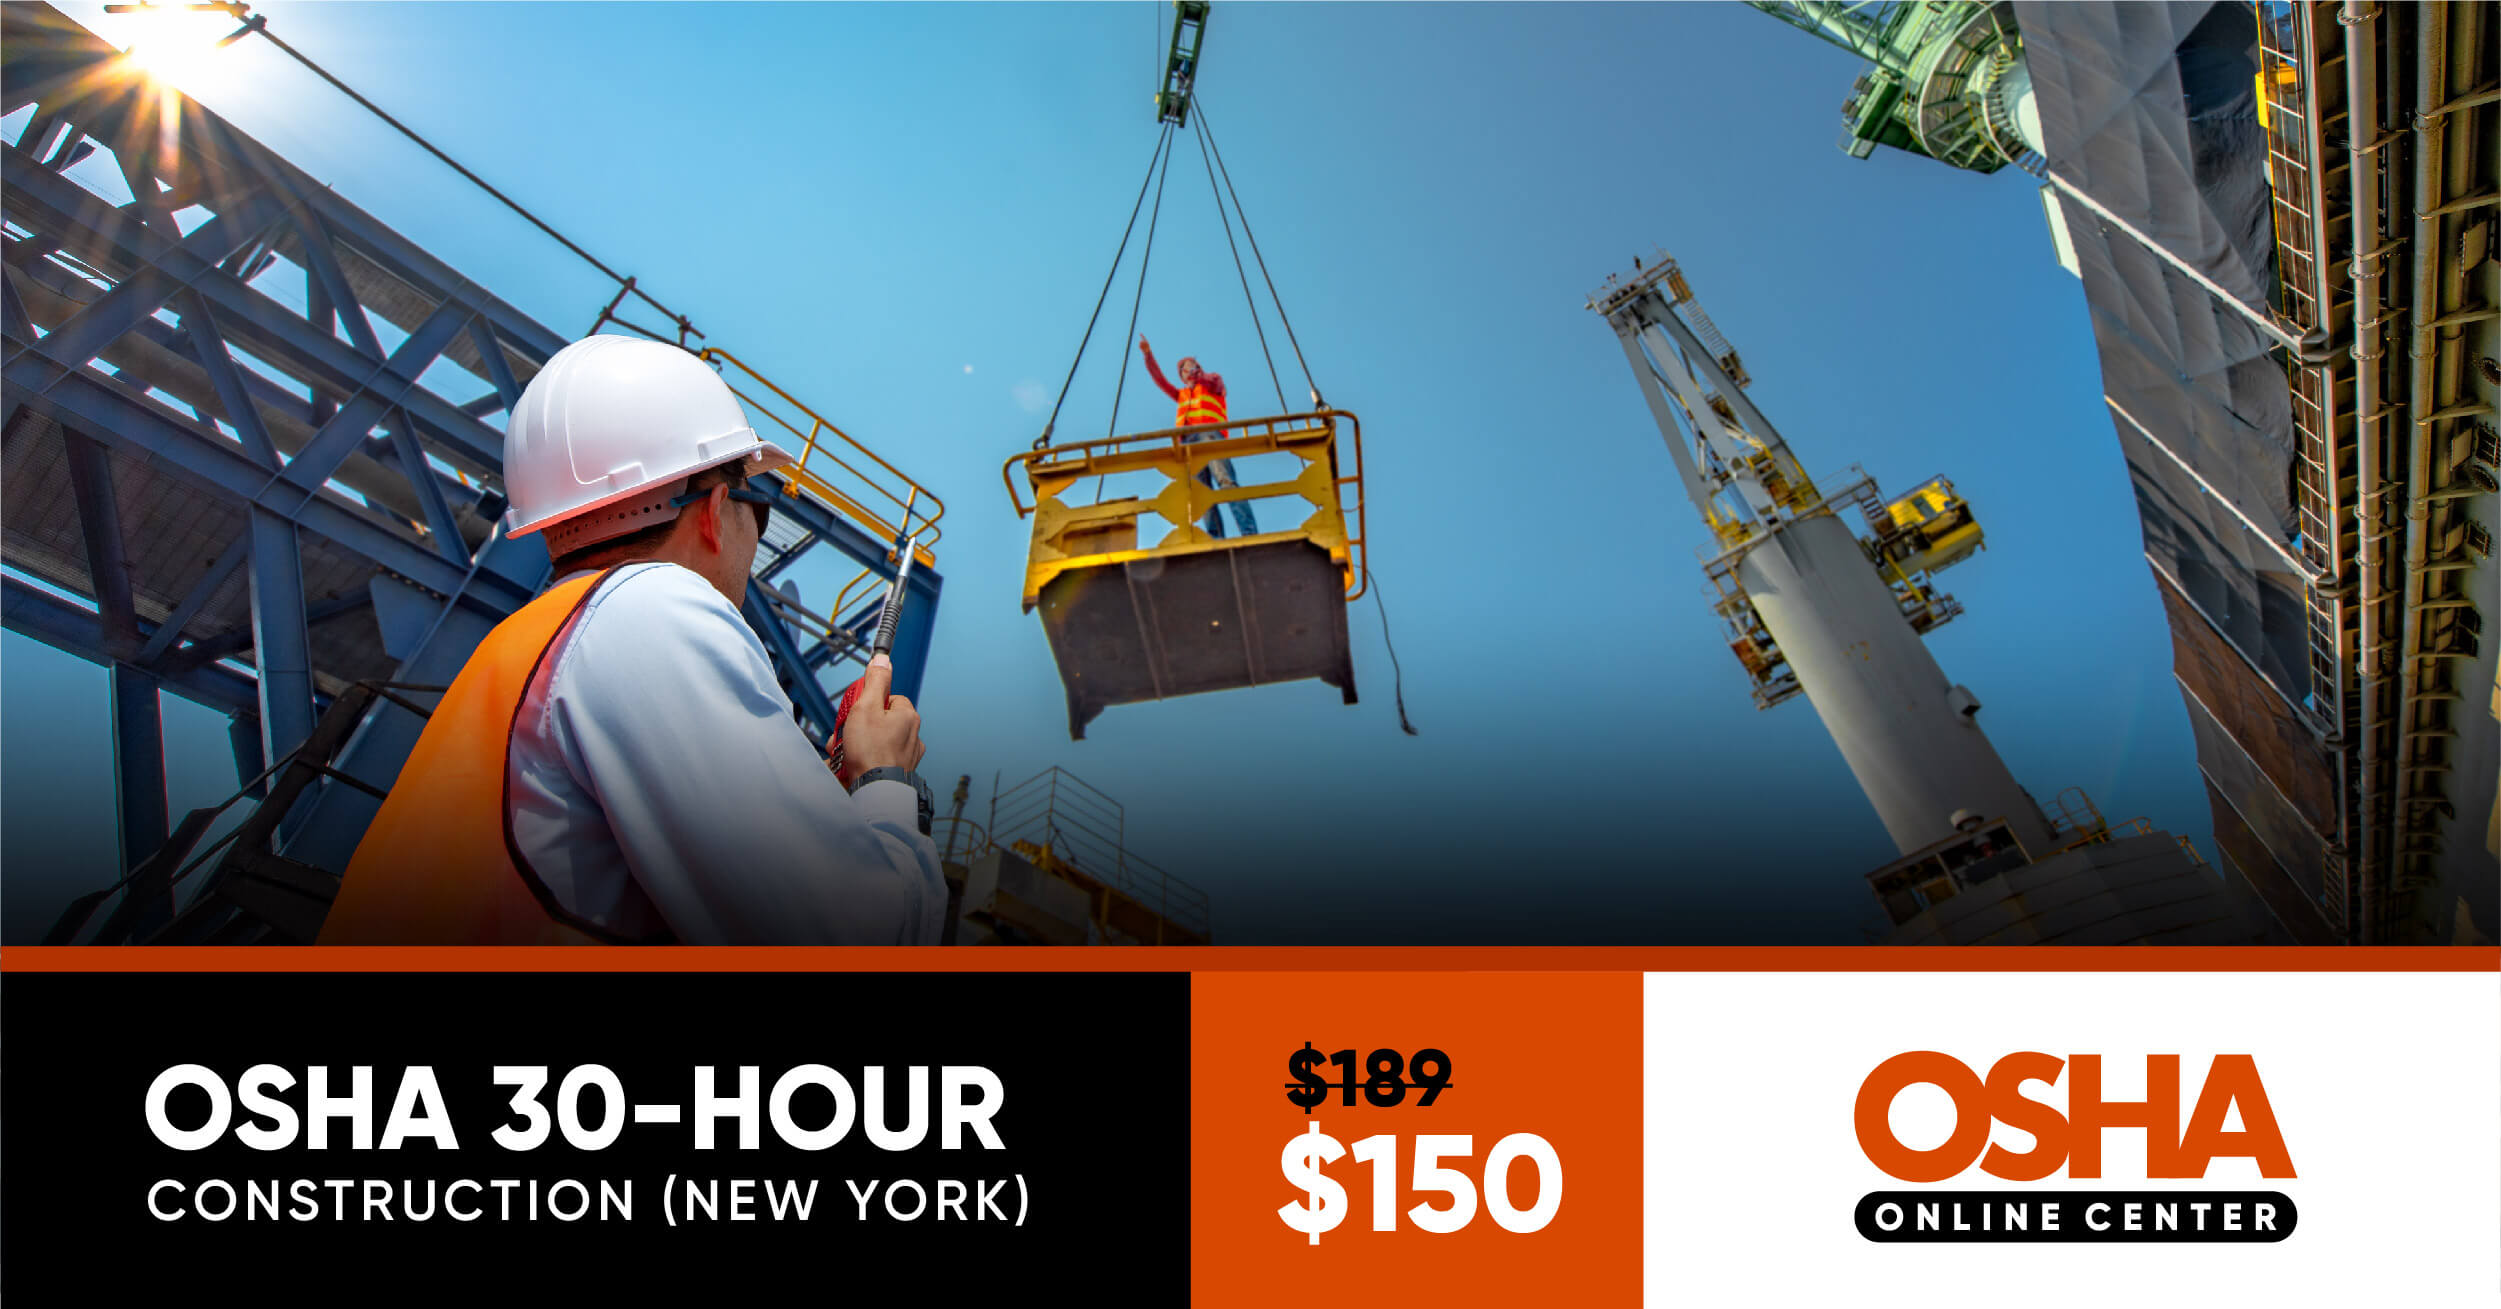 New York OSHA 30Hour Construction with FREE Course